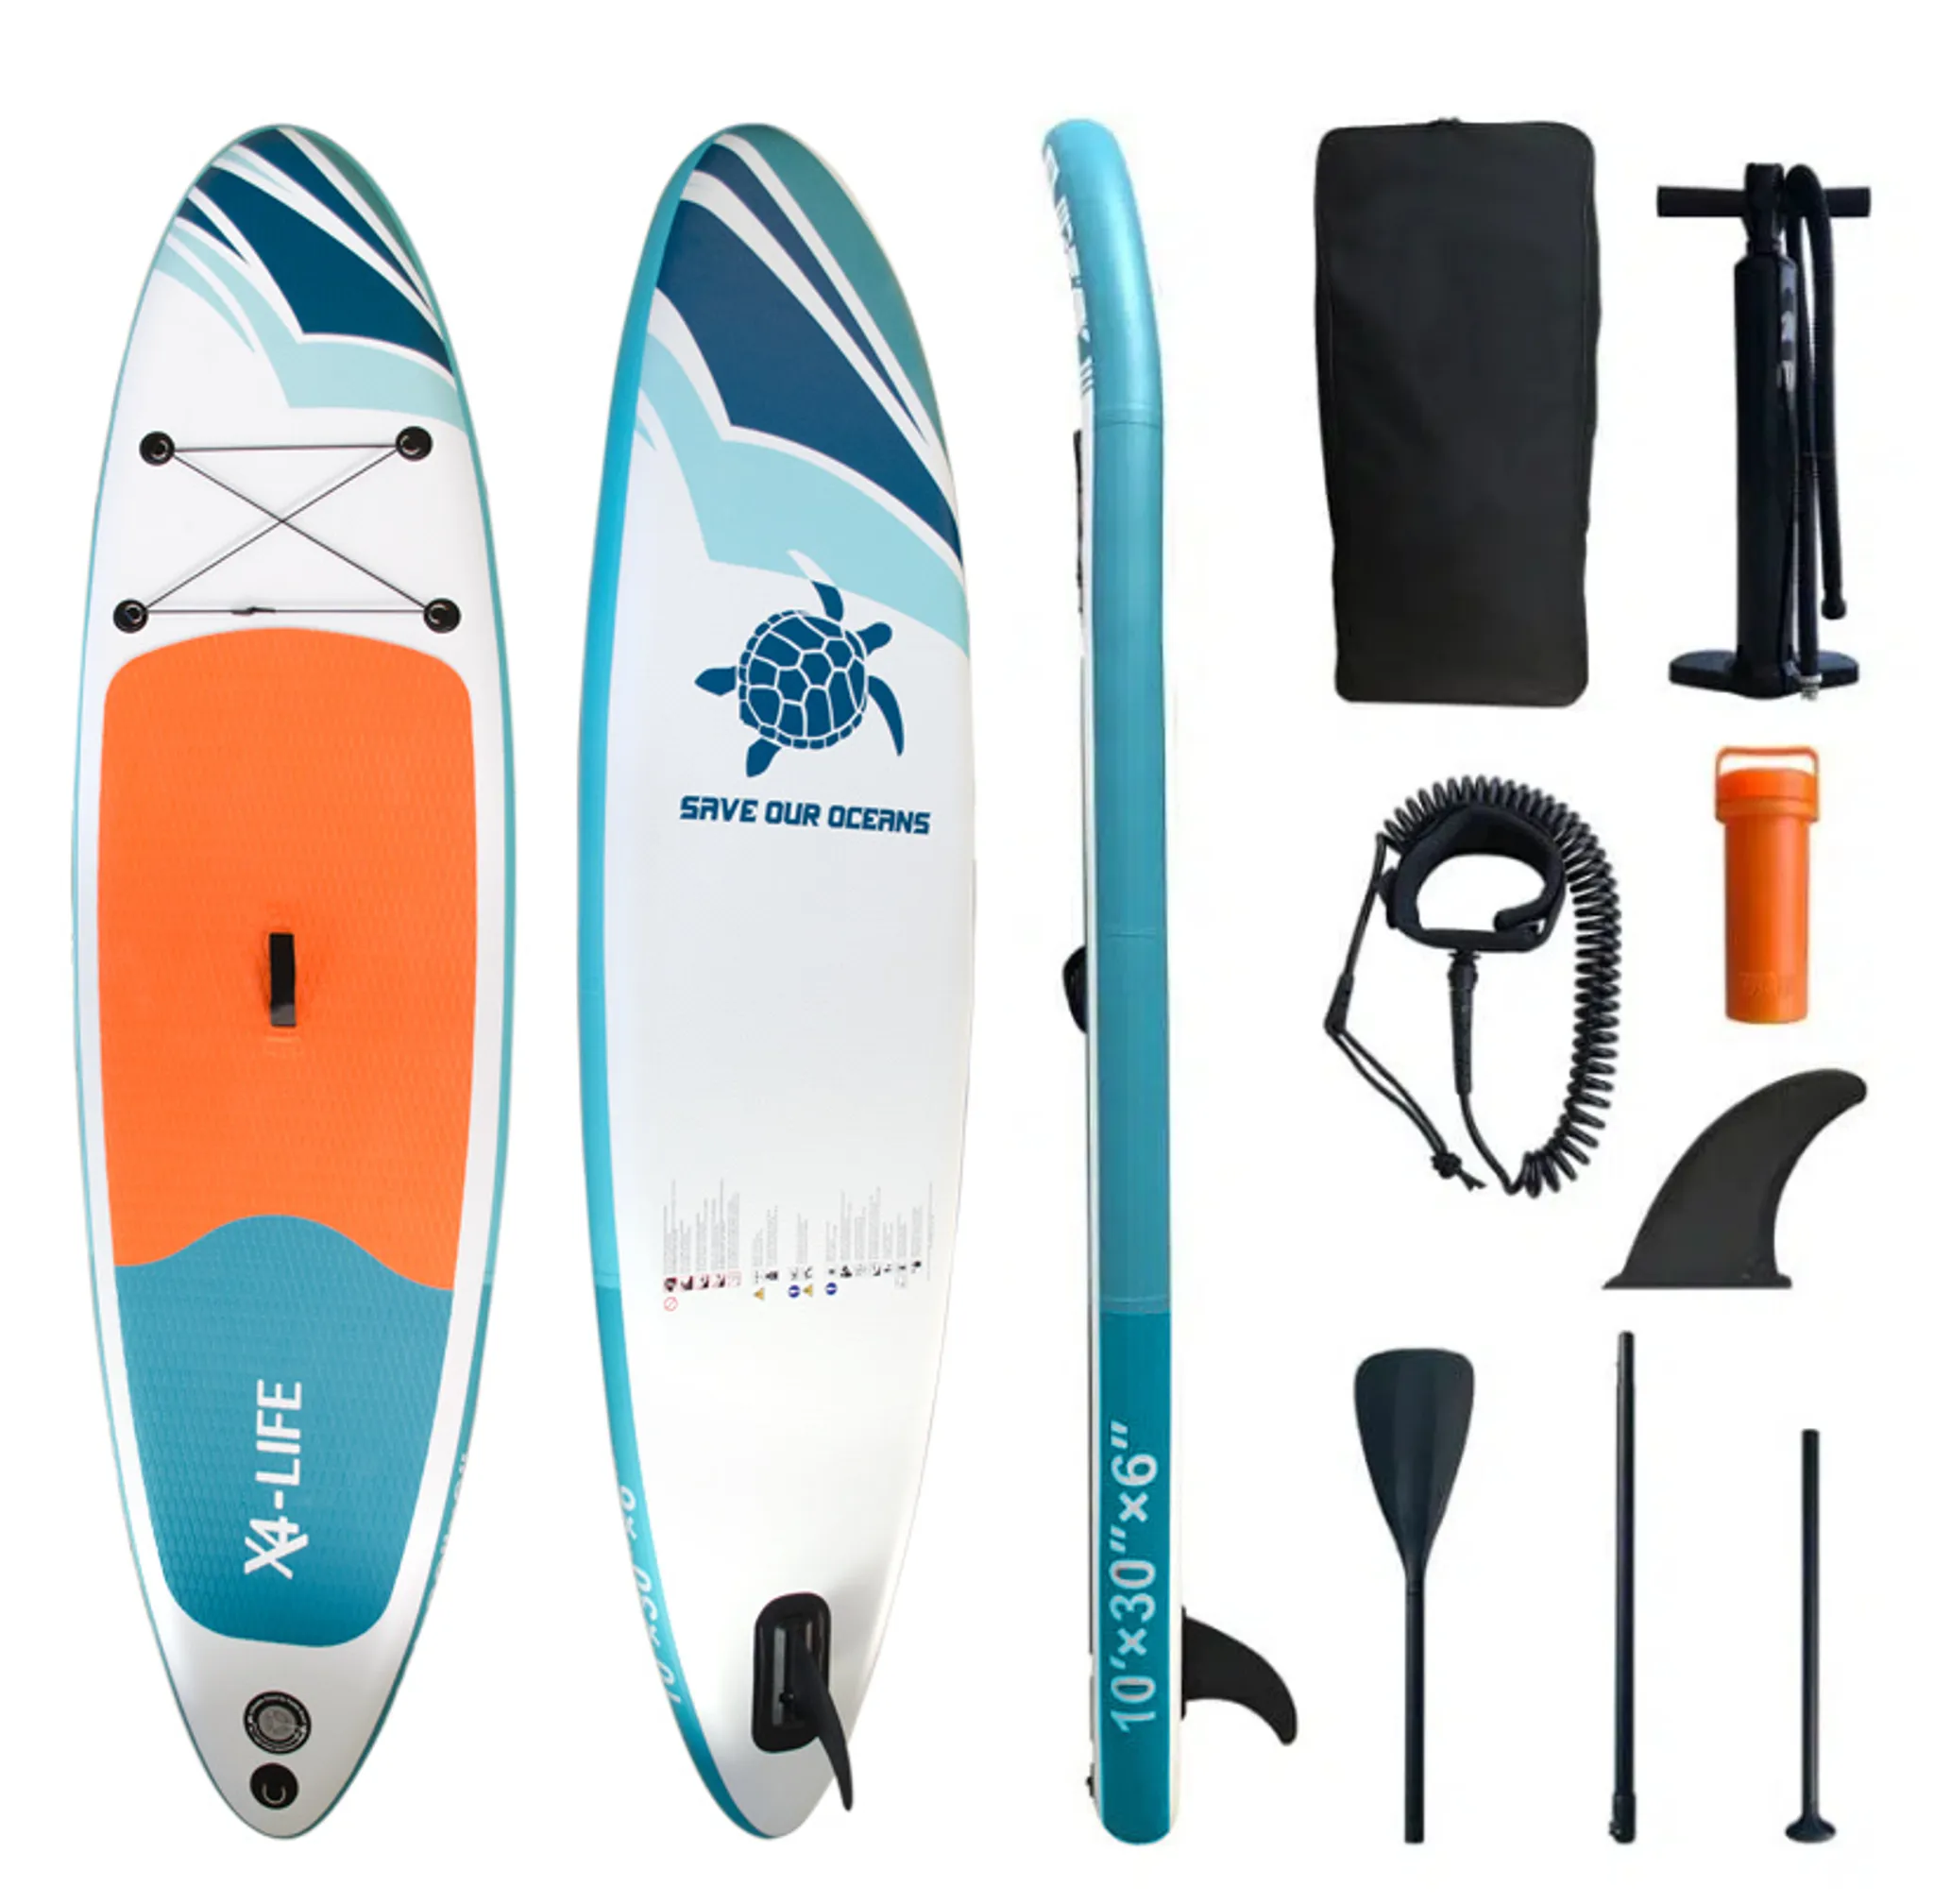 X4-LIFE Stand Up Paddle Board - SUP Set